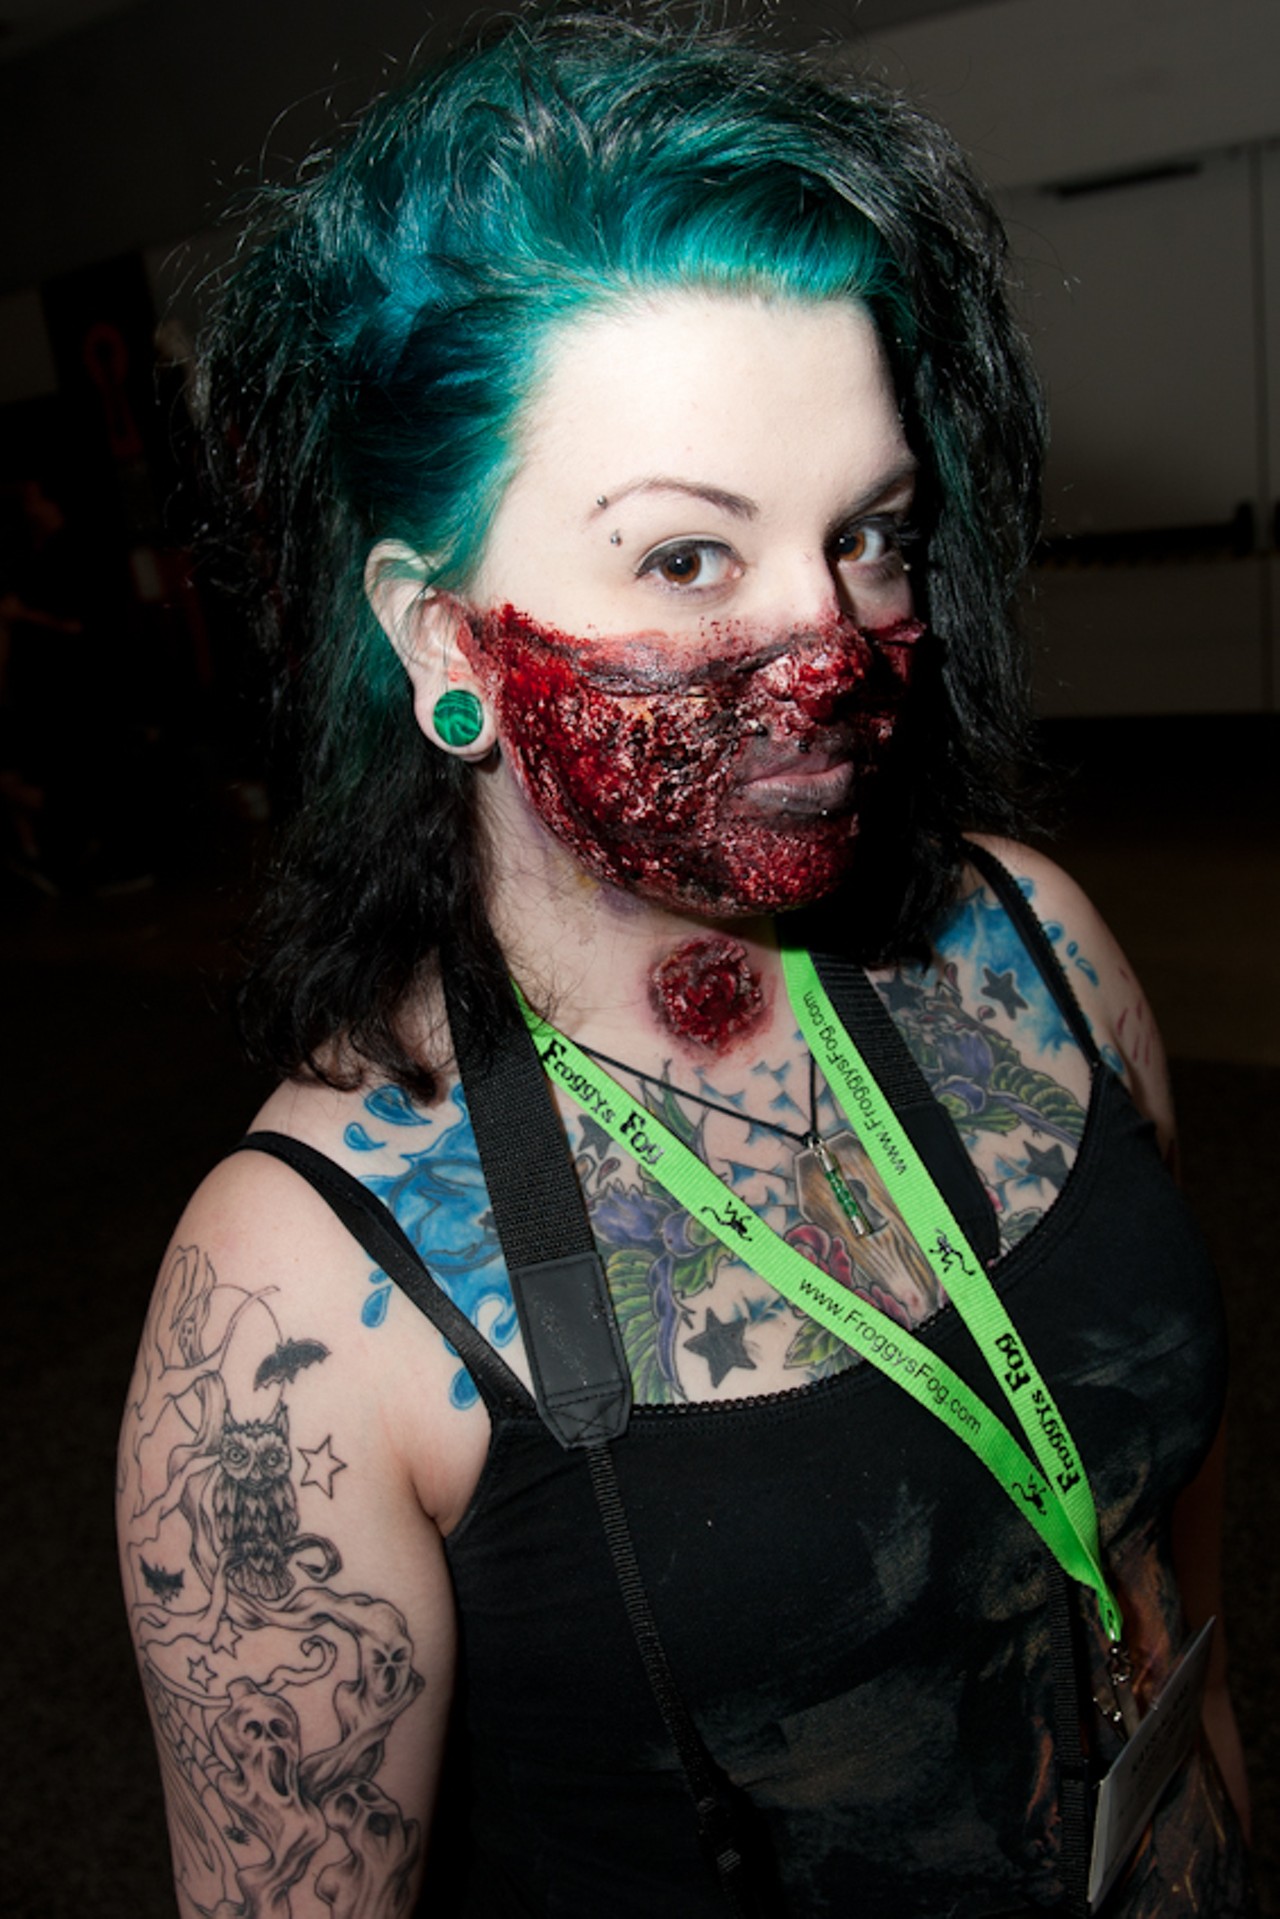 Gory Glory at the TransWorld Haunt Show